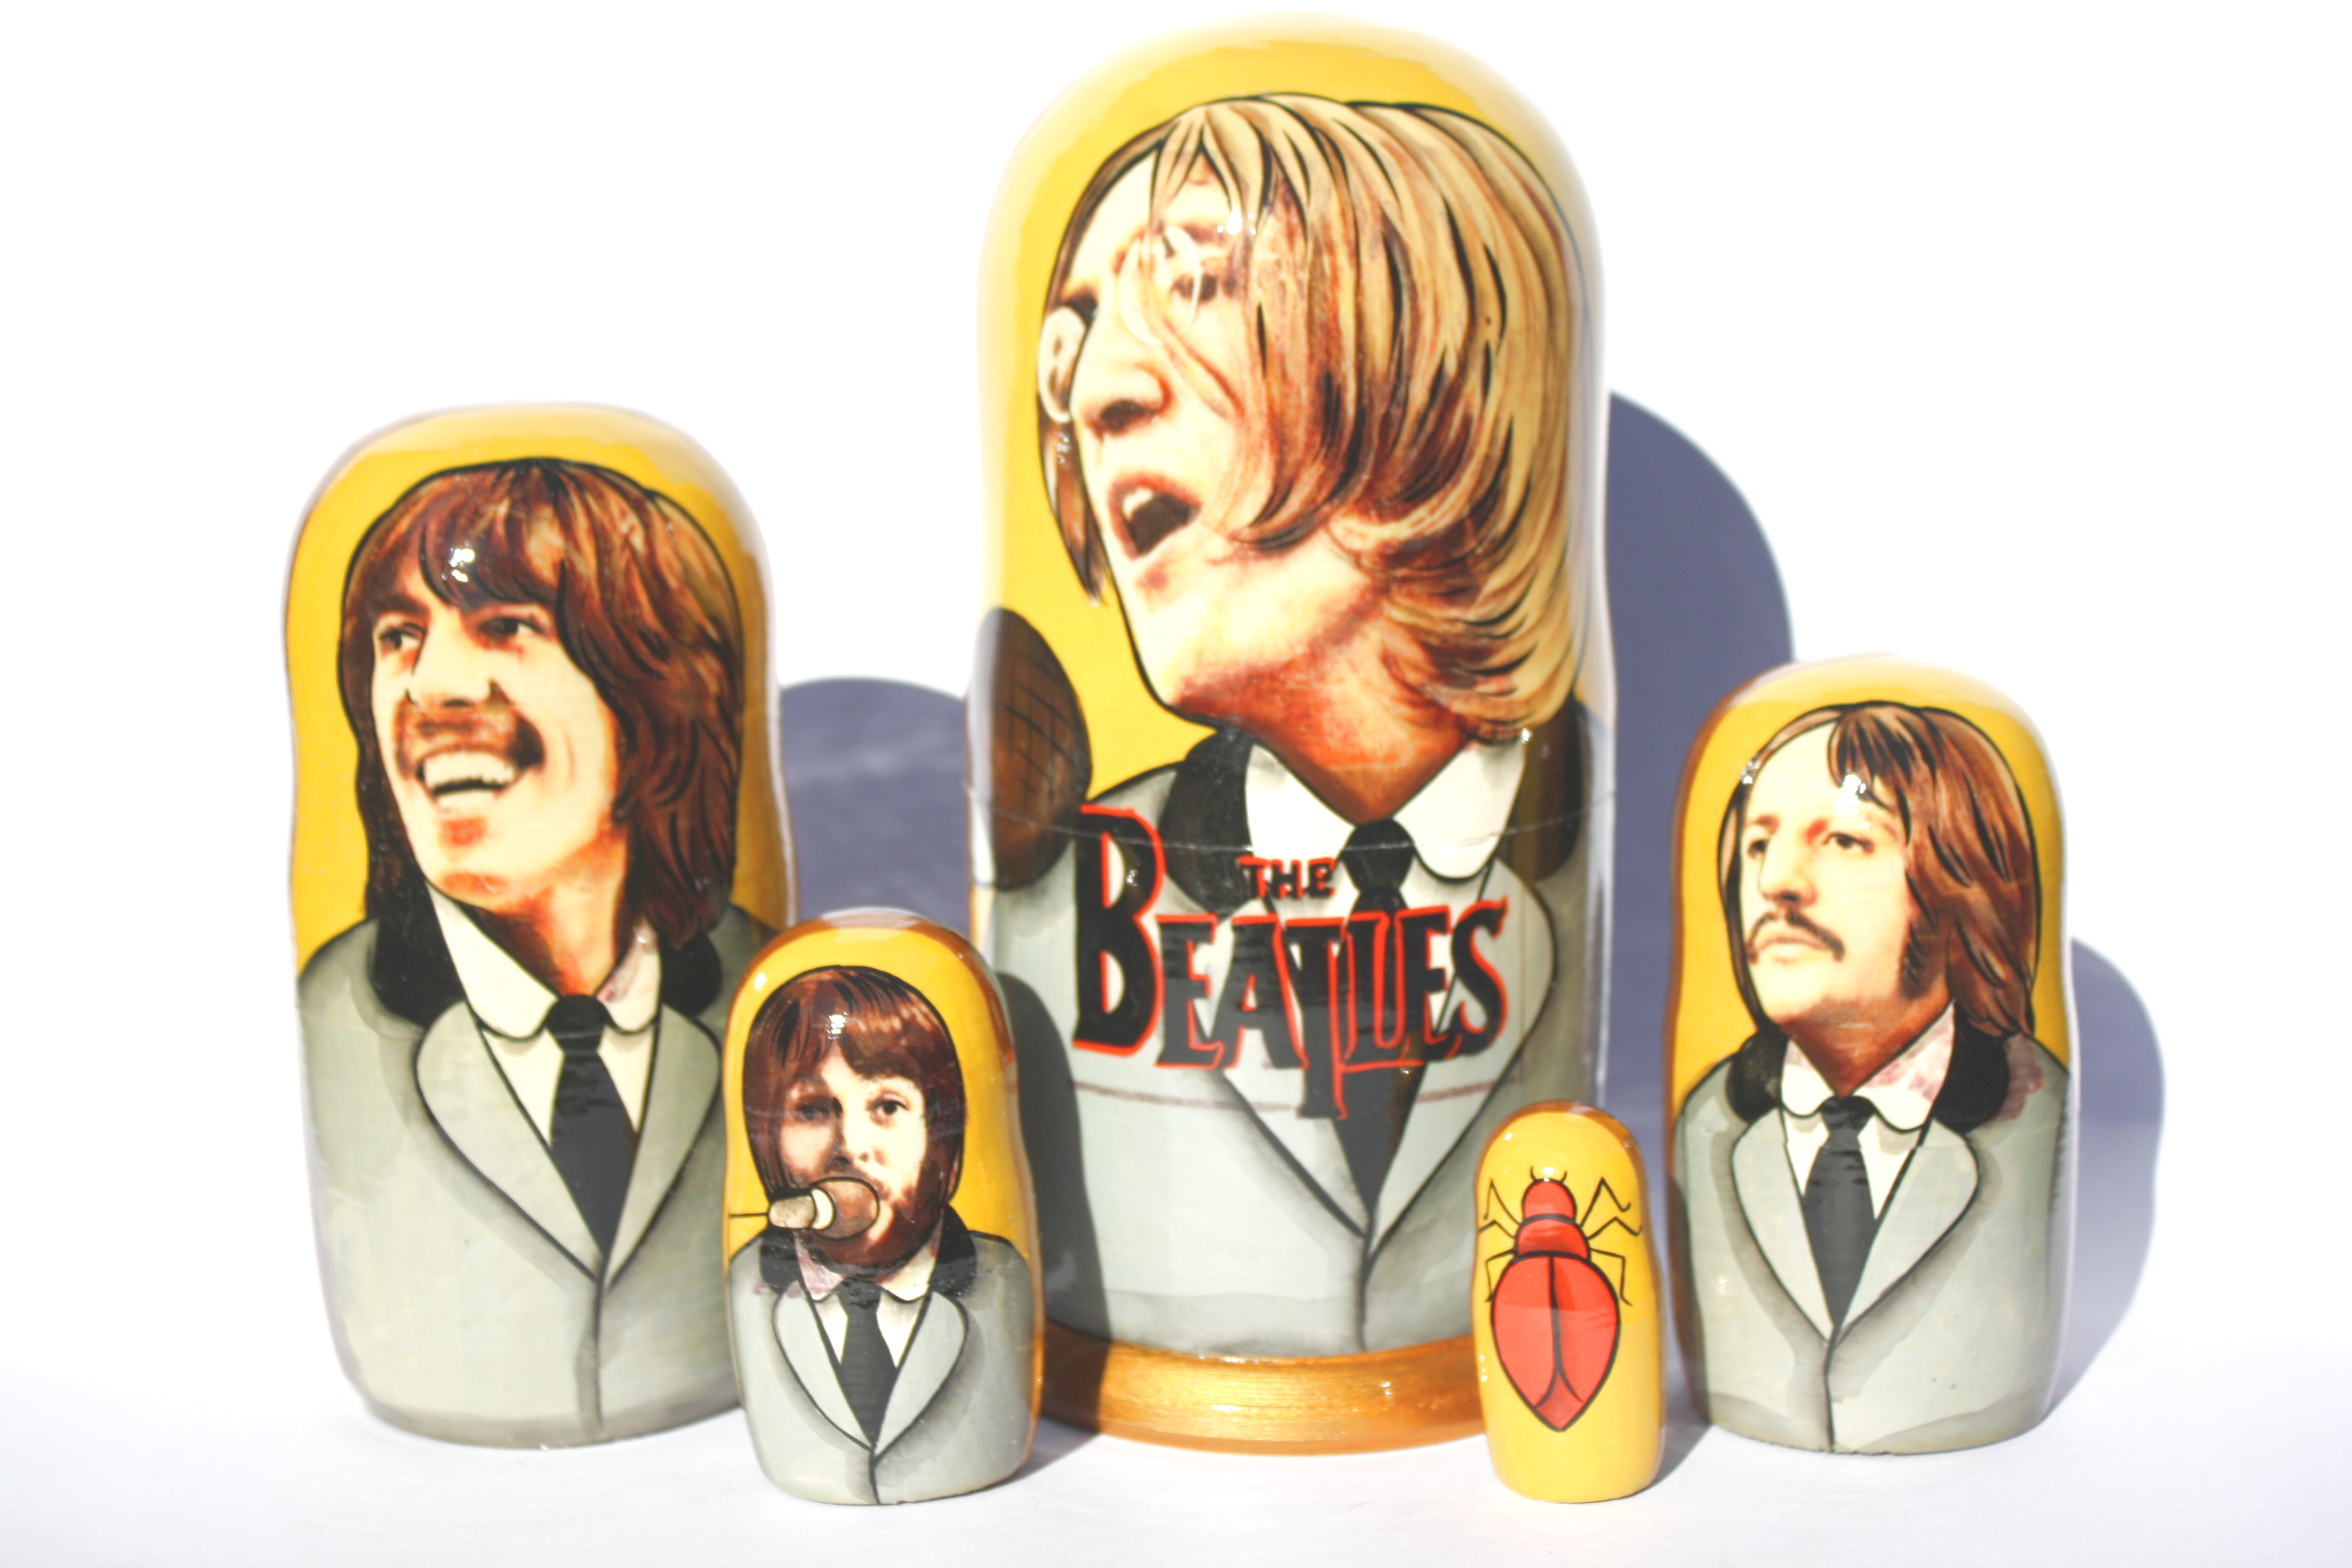 A 5 nested set of celebrities, Beatles